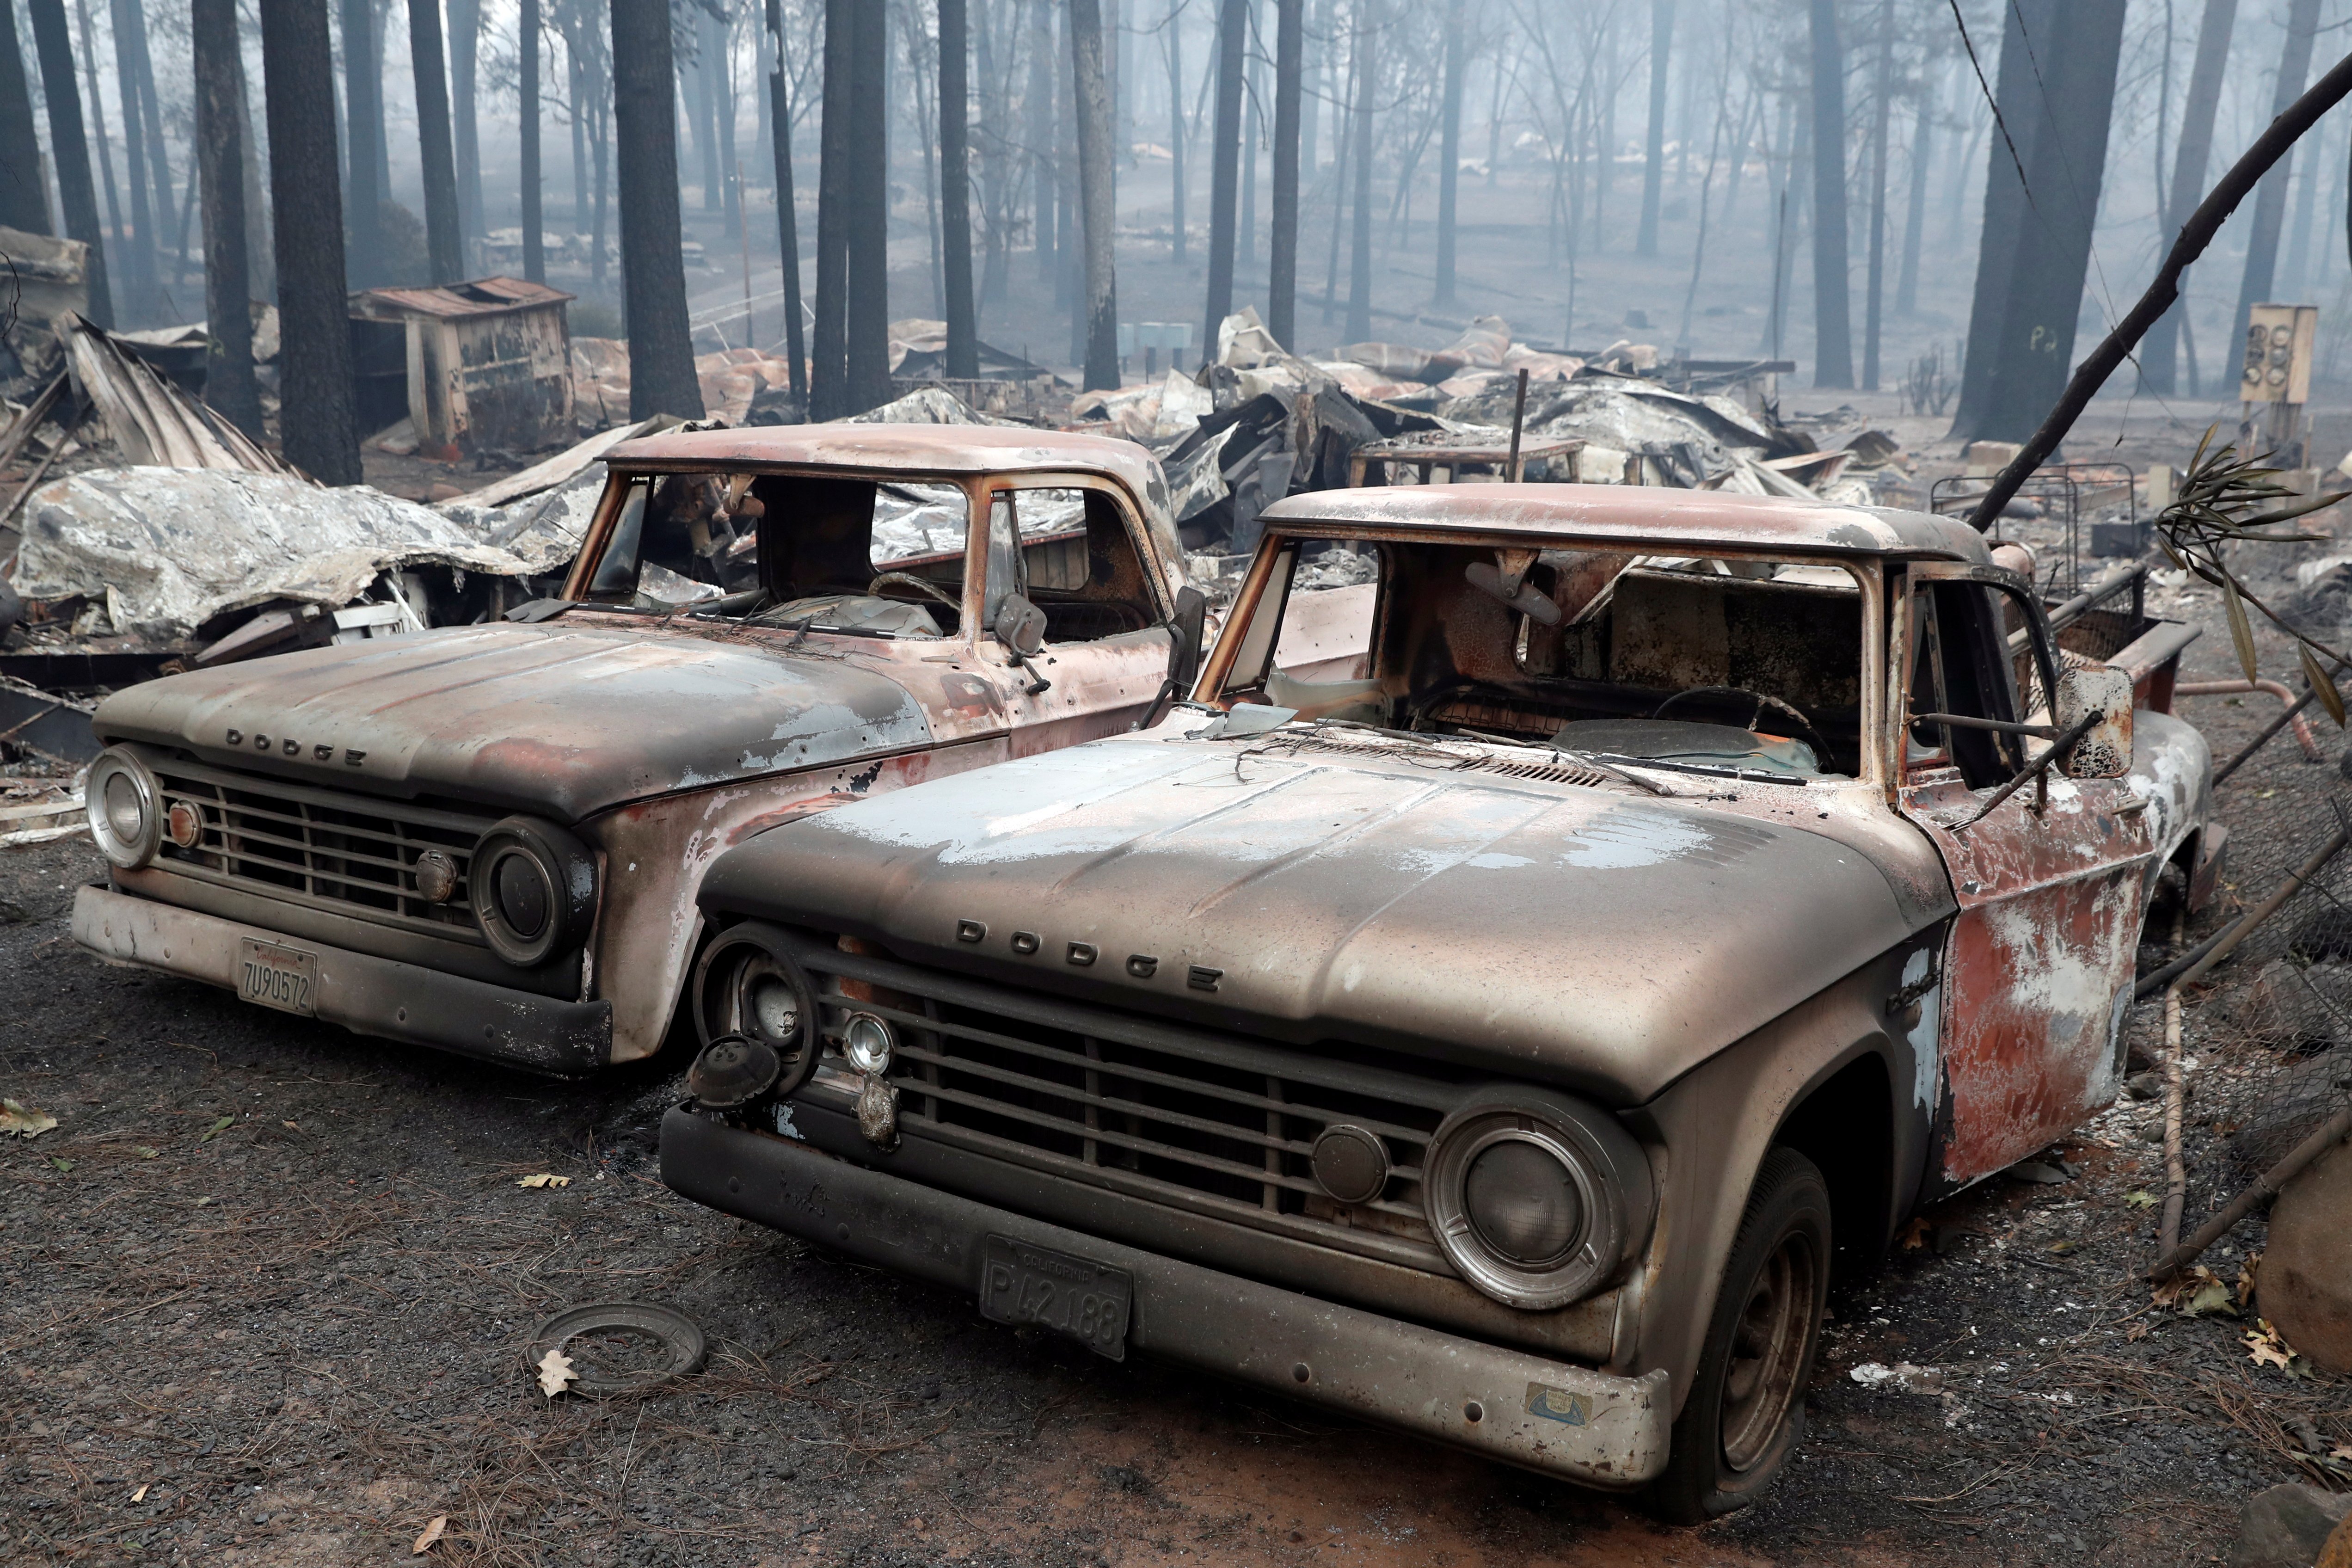 Trucks destroyed by the Camp Fire are seen in Paradise, California, U.S., November 14, 2018. REUTERS/Terray Sylvester